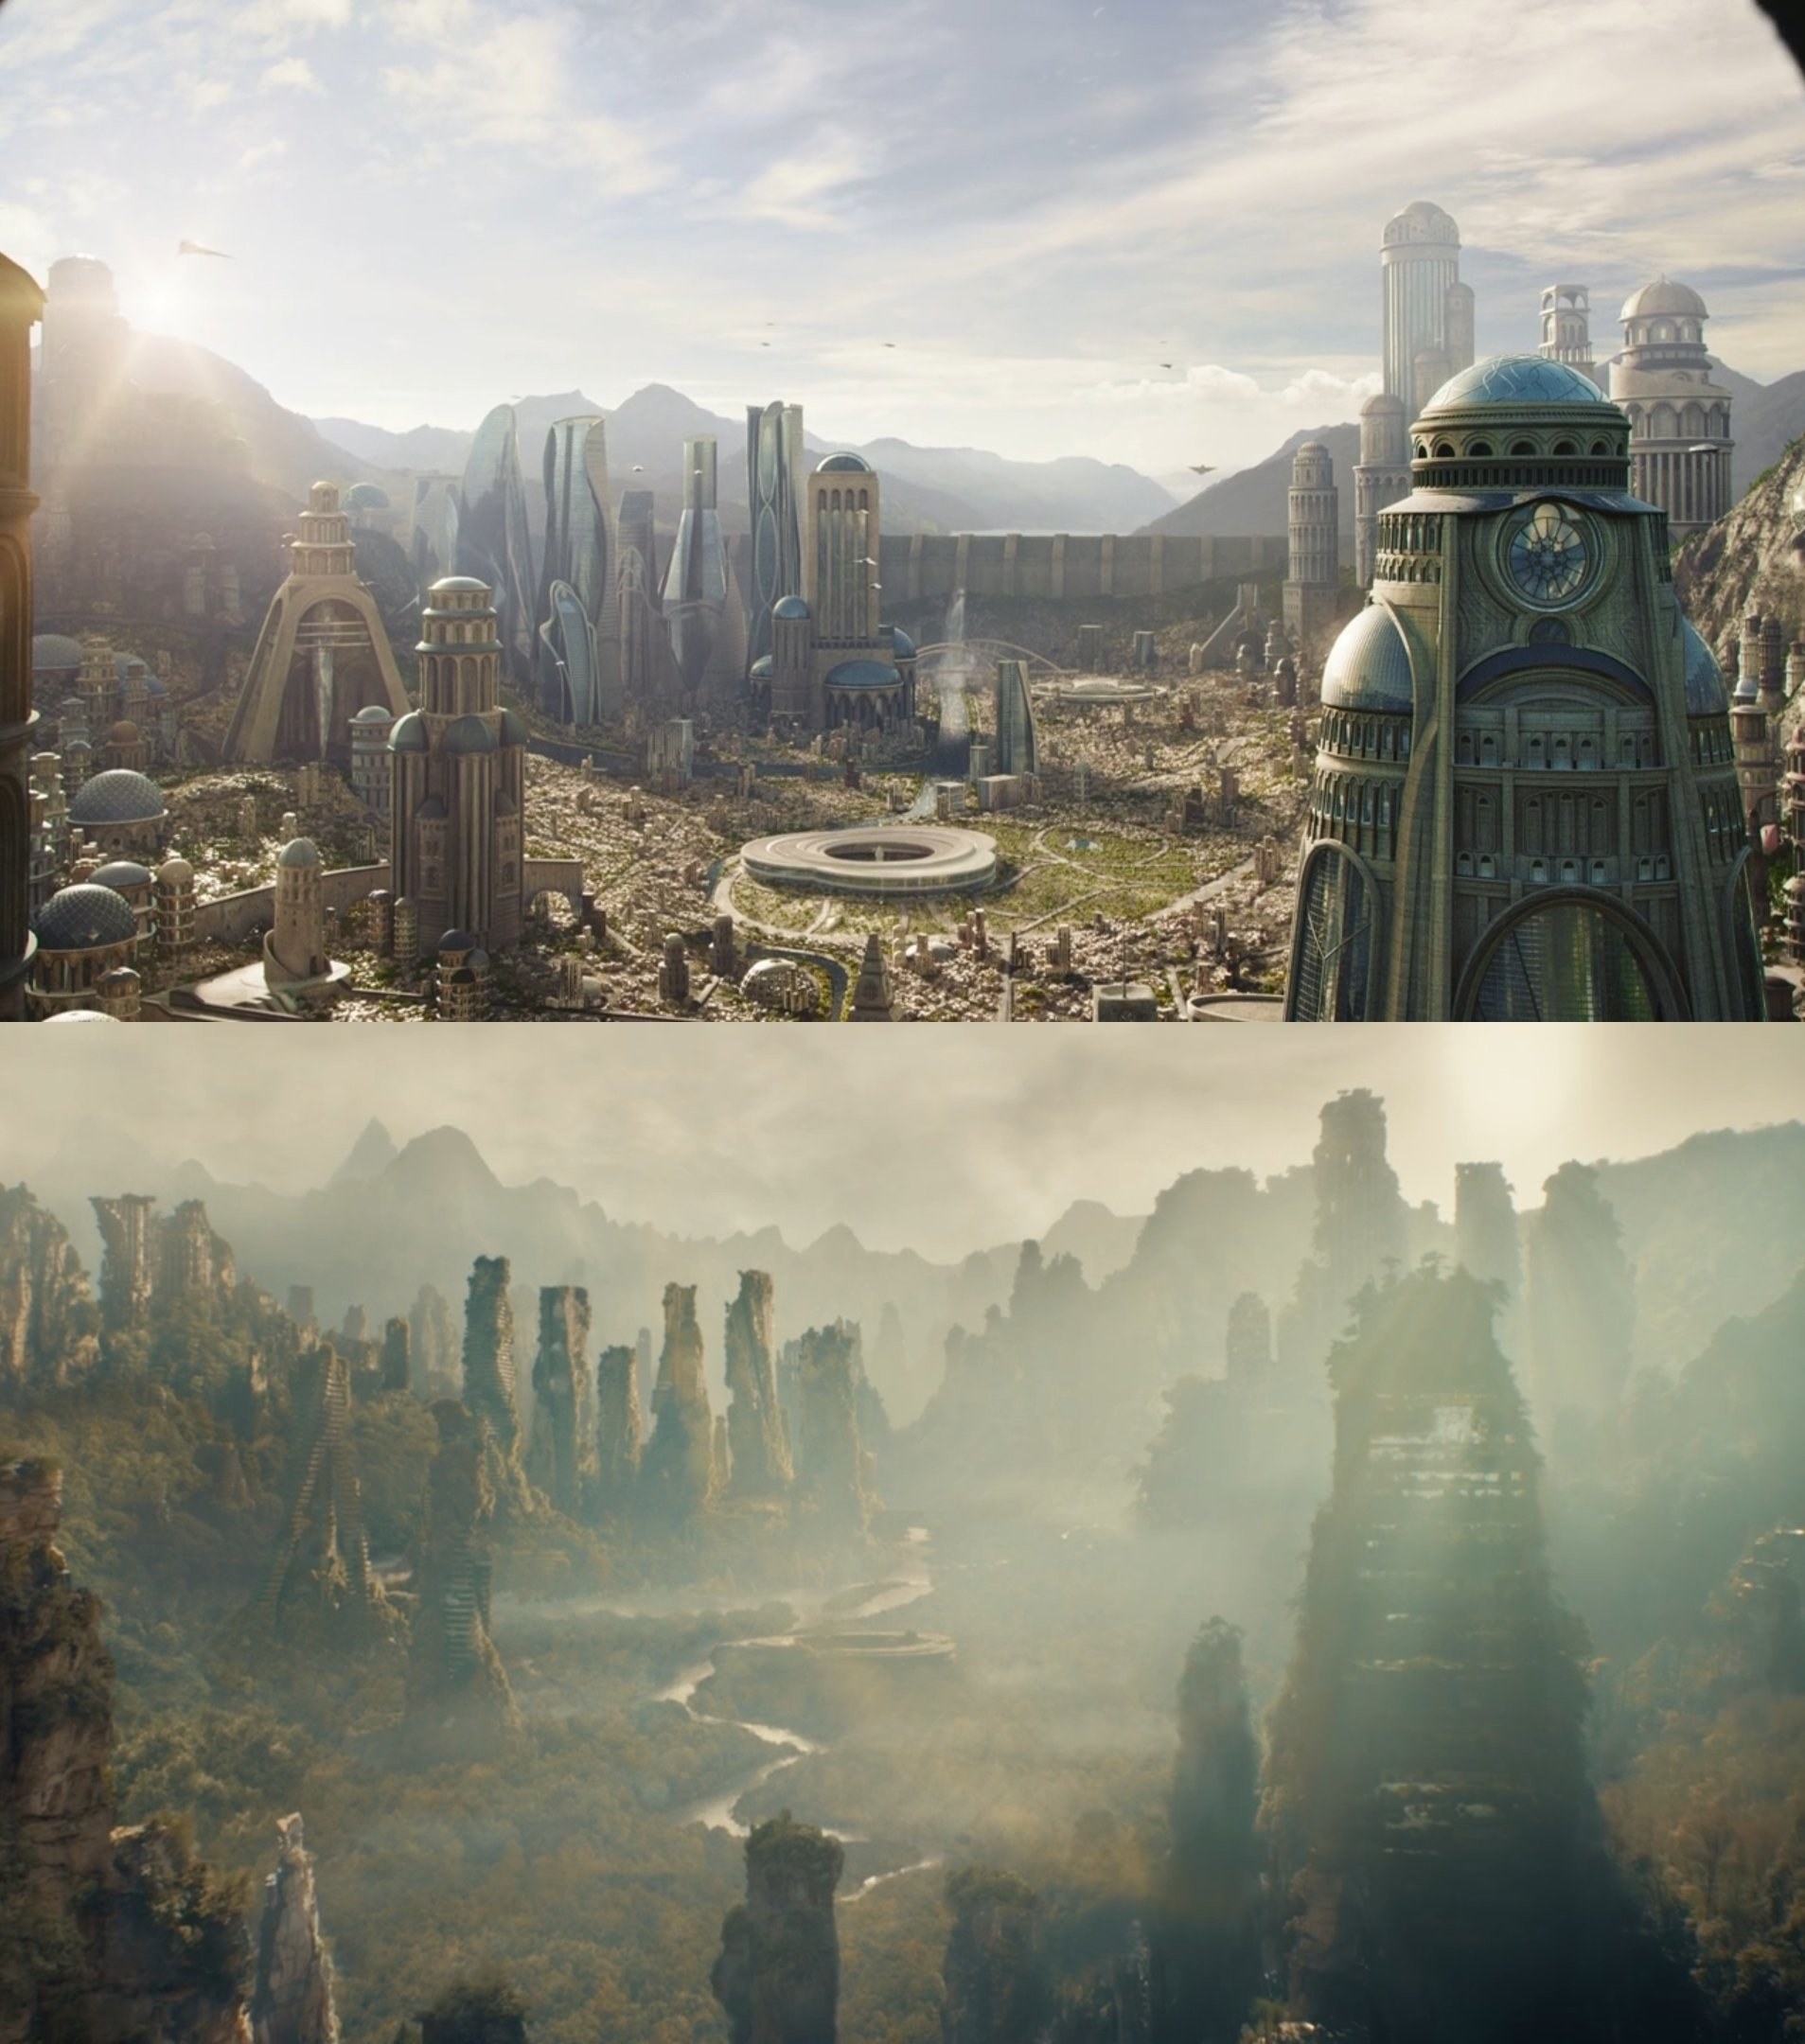 Two shots combined – on top is a large, futuristic city with towering skyscrapers, glistening domes, and flying vehicles in the sky. On the bottom is the same city, but in the present Age – all the buildings have been overgrown by plant life.